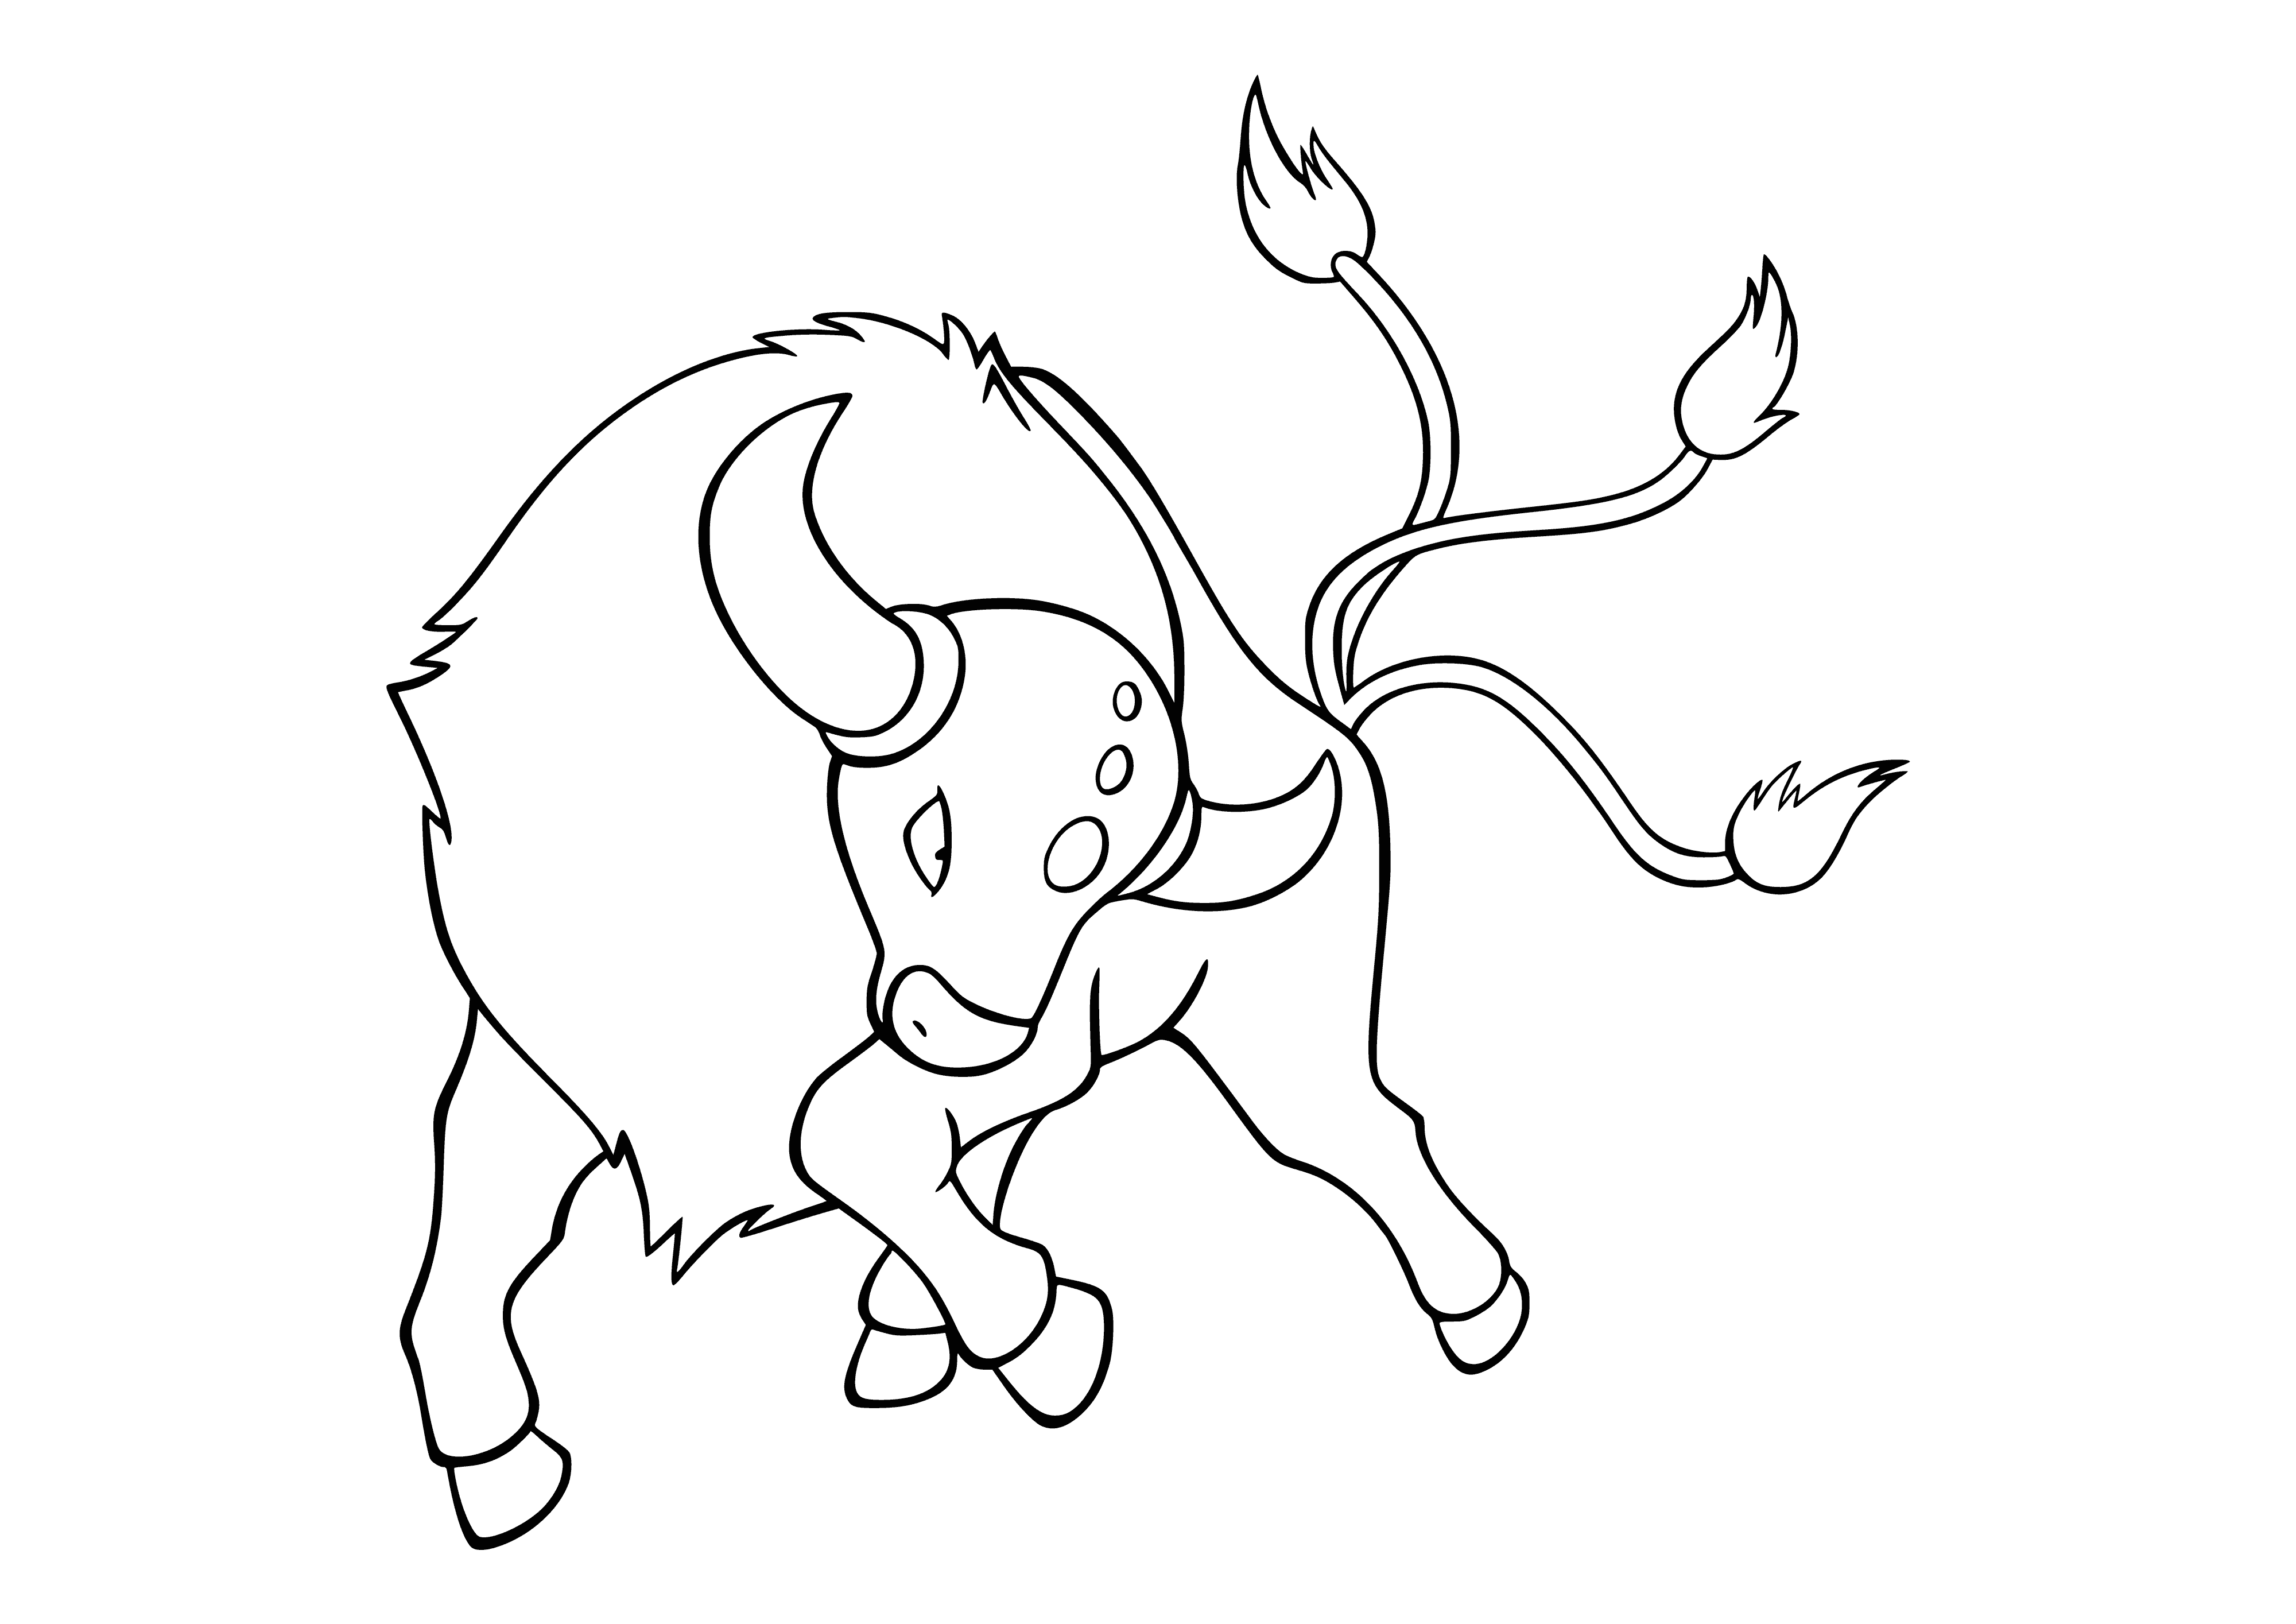 coloring page: Adorable cow-like Pokémon coloring page is brown w/ light underside, short snout & tail, red eyes, and two horns. Has a brown patch on its back.